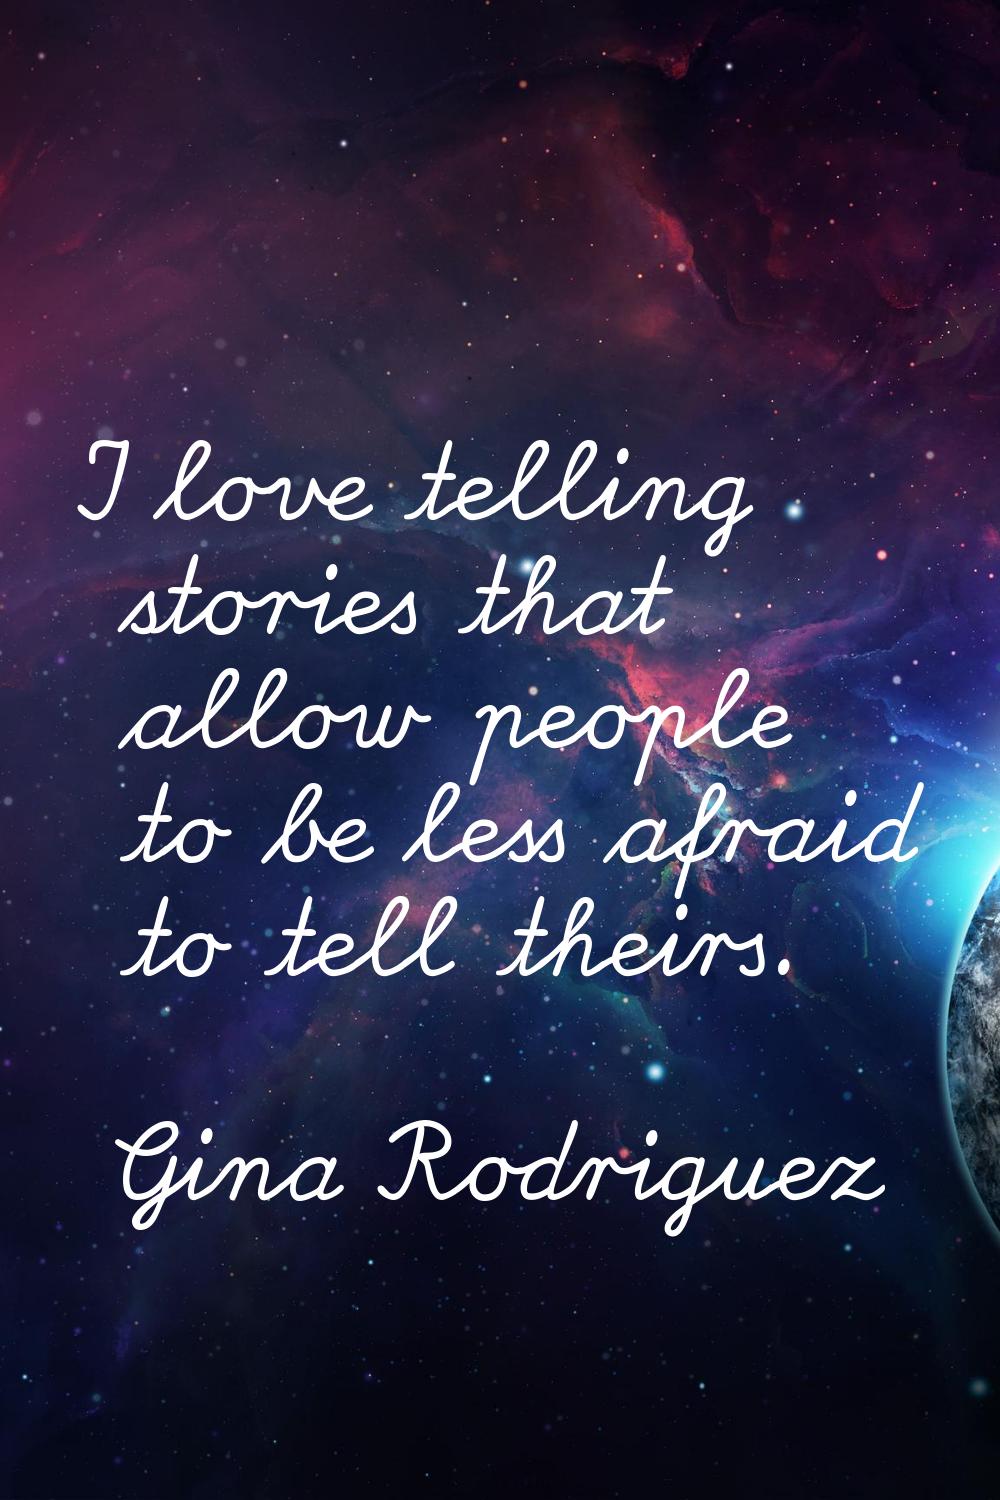 I love telling stories that allow people to be less afraid to tell theirs.